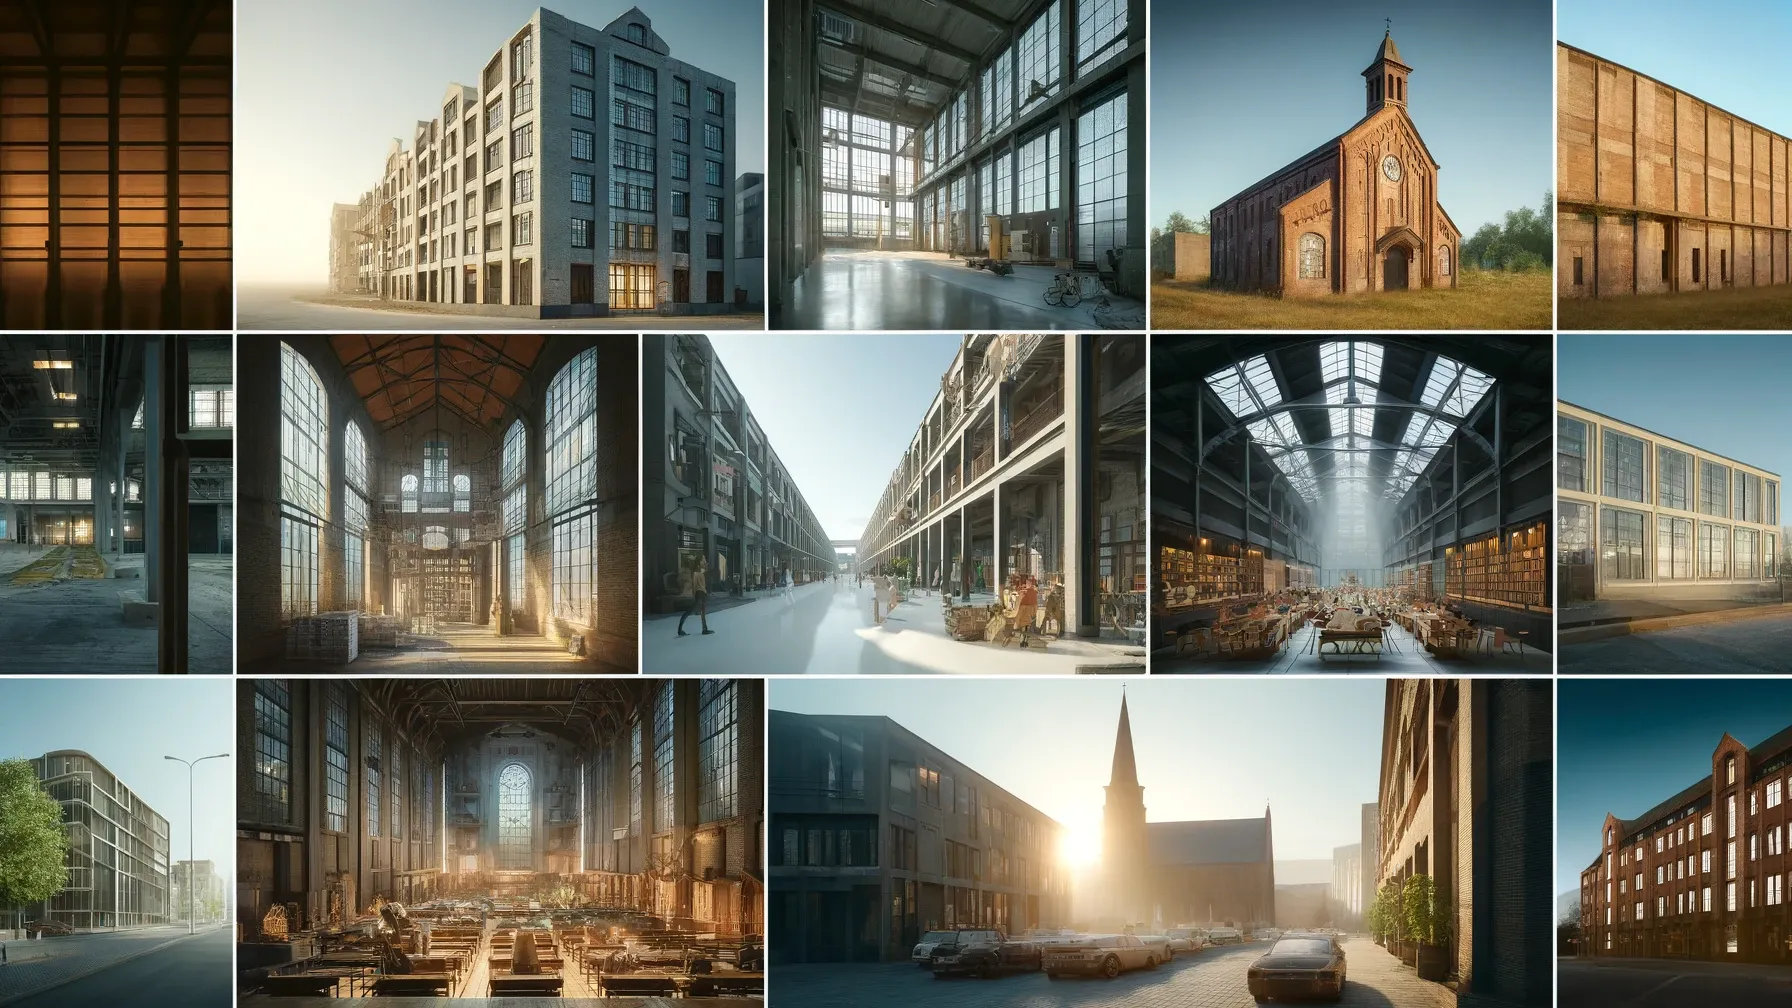 A collage showcasing different adaptive reuse projects with before and after images